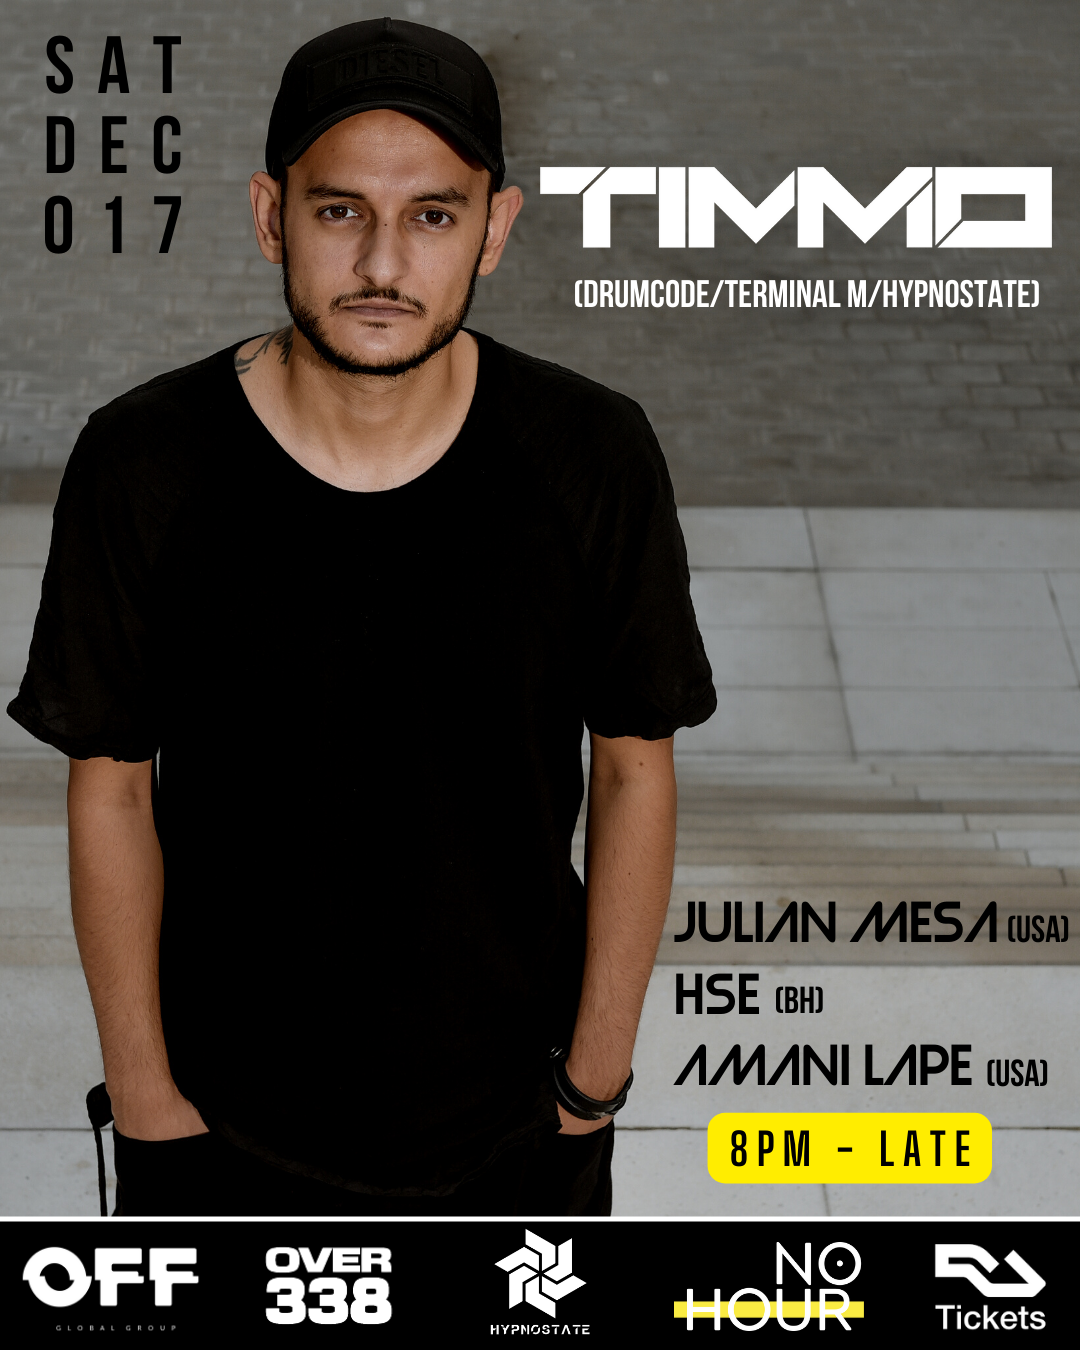 OFF Global Group presents: Timmo (Drumcode/Terminal M/Hypnostate) - Página frontal